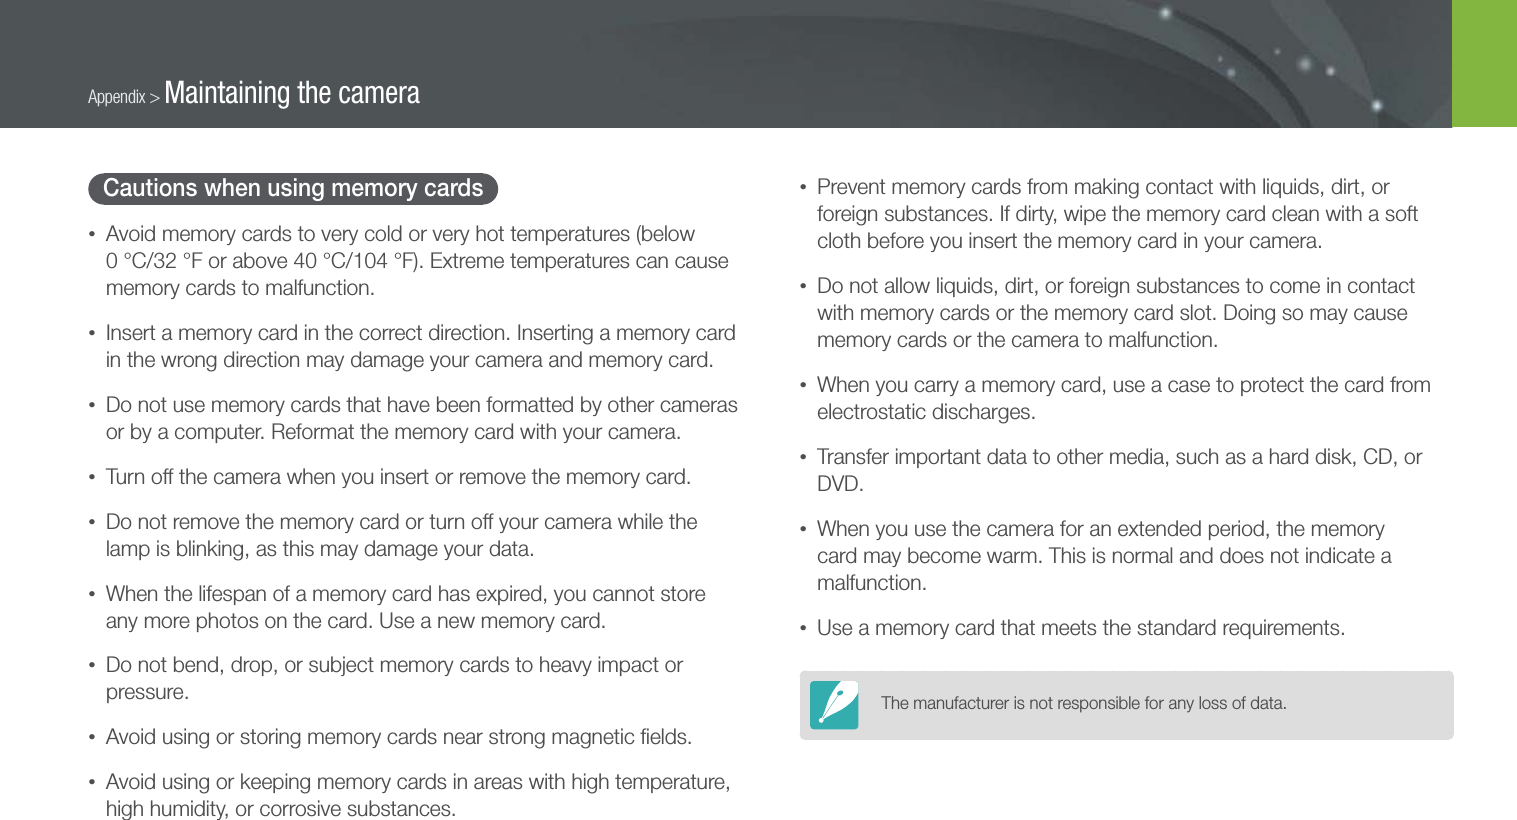 155Appendix &gt; Maintaining the cameraCautions when using memory cards• Avoid memory cards to very cold or very hot temperatures (below  0 °C/32 °F or above 40 °C/104 °F). Extreme temperatures can cause memory cards to malfunction.• Insert a memory card in the correct direction. Inserting a memory card in the wrong direction may damage your camera and memory card.• Do not use memory cards that have been formatted by other cameras or by a computer. Reformat the memory card with your camera.• Turn off the camera when you insert or remove the memory card.• Do not remove the memory card or turn off your camera while the lamp is blinking, as this may damage your data.• When the lifespan of a memory card has expired, you cannot store any more photos on the card. Use a new memory card.• Do not bend, drop, or subject memory cards to heavy impact or pressure.• Avoid using or storing memory cards near strong magnetic ﬁelds.• Avoid using or keeping memory cards in areas with high temperature, high humidity, or corrosive substances.• Prevent memory cards from making contact with liquids, dirt, or foreign substances. If dirty, wipe the memory card clean with a soft cloth before you insert the memory card in your camera.• Do not allow liquids, dirt, or foreign substances to come in contact with memory cards or the memory card slot. Doing so may cause memory cards or the camera to malfunction.• When you carry a memory card, use a case to protect the card from electrostatic discharges.• Transfer important data to other media, such as a hard disk, CD, or DVD.• When you use the camera for an extended period, the memory card may become warm. This is normal and does not indicate a malfunction.• Use a memory card that meets the standard requirements.The manufacturer is not responsible for any loss of data.